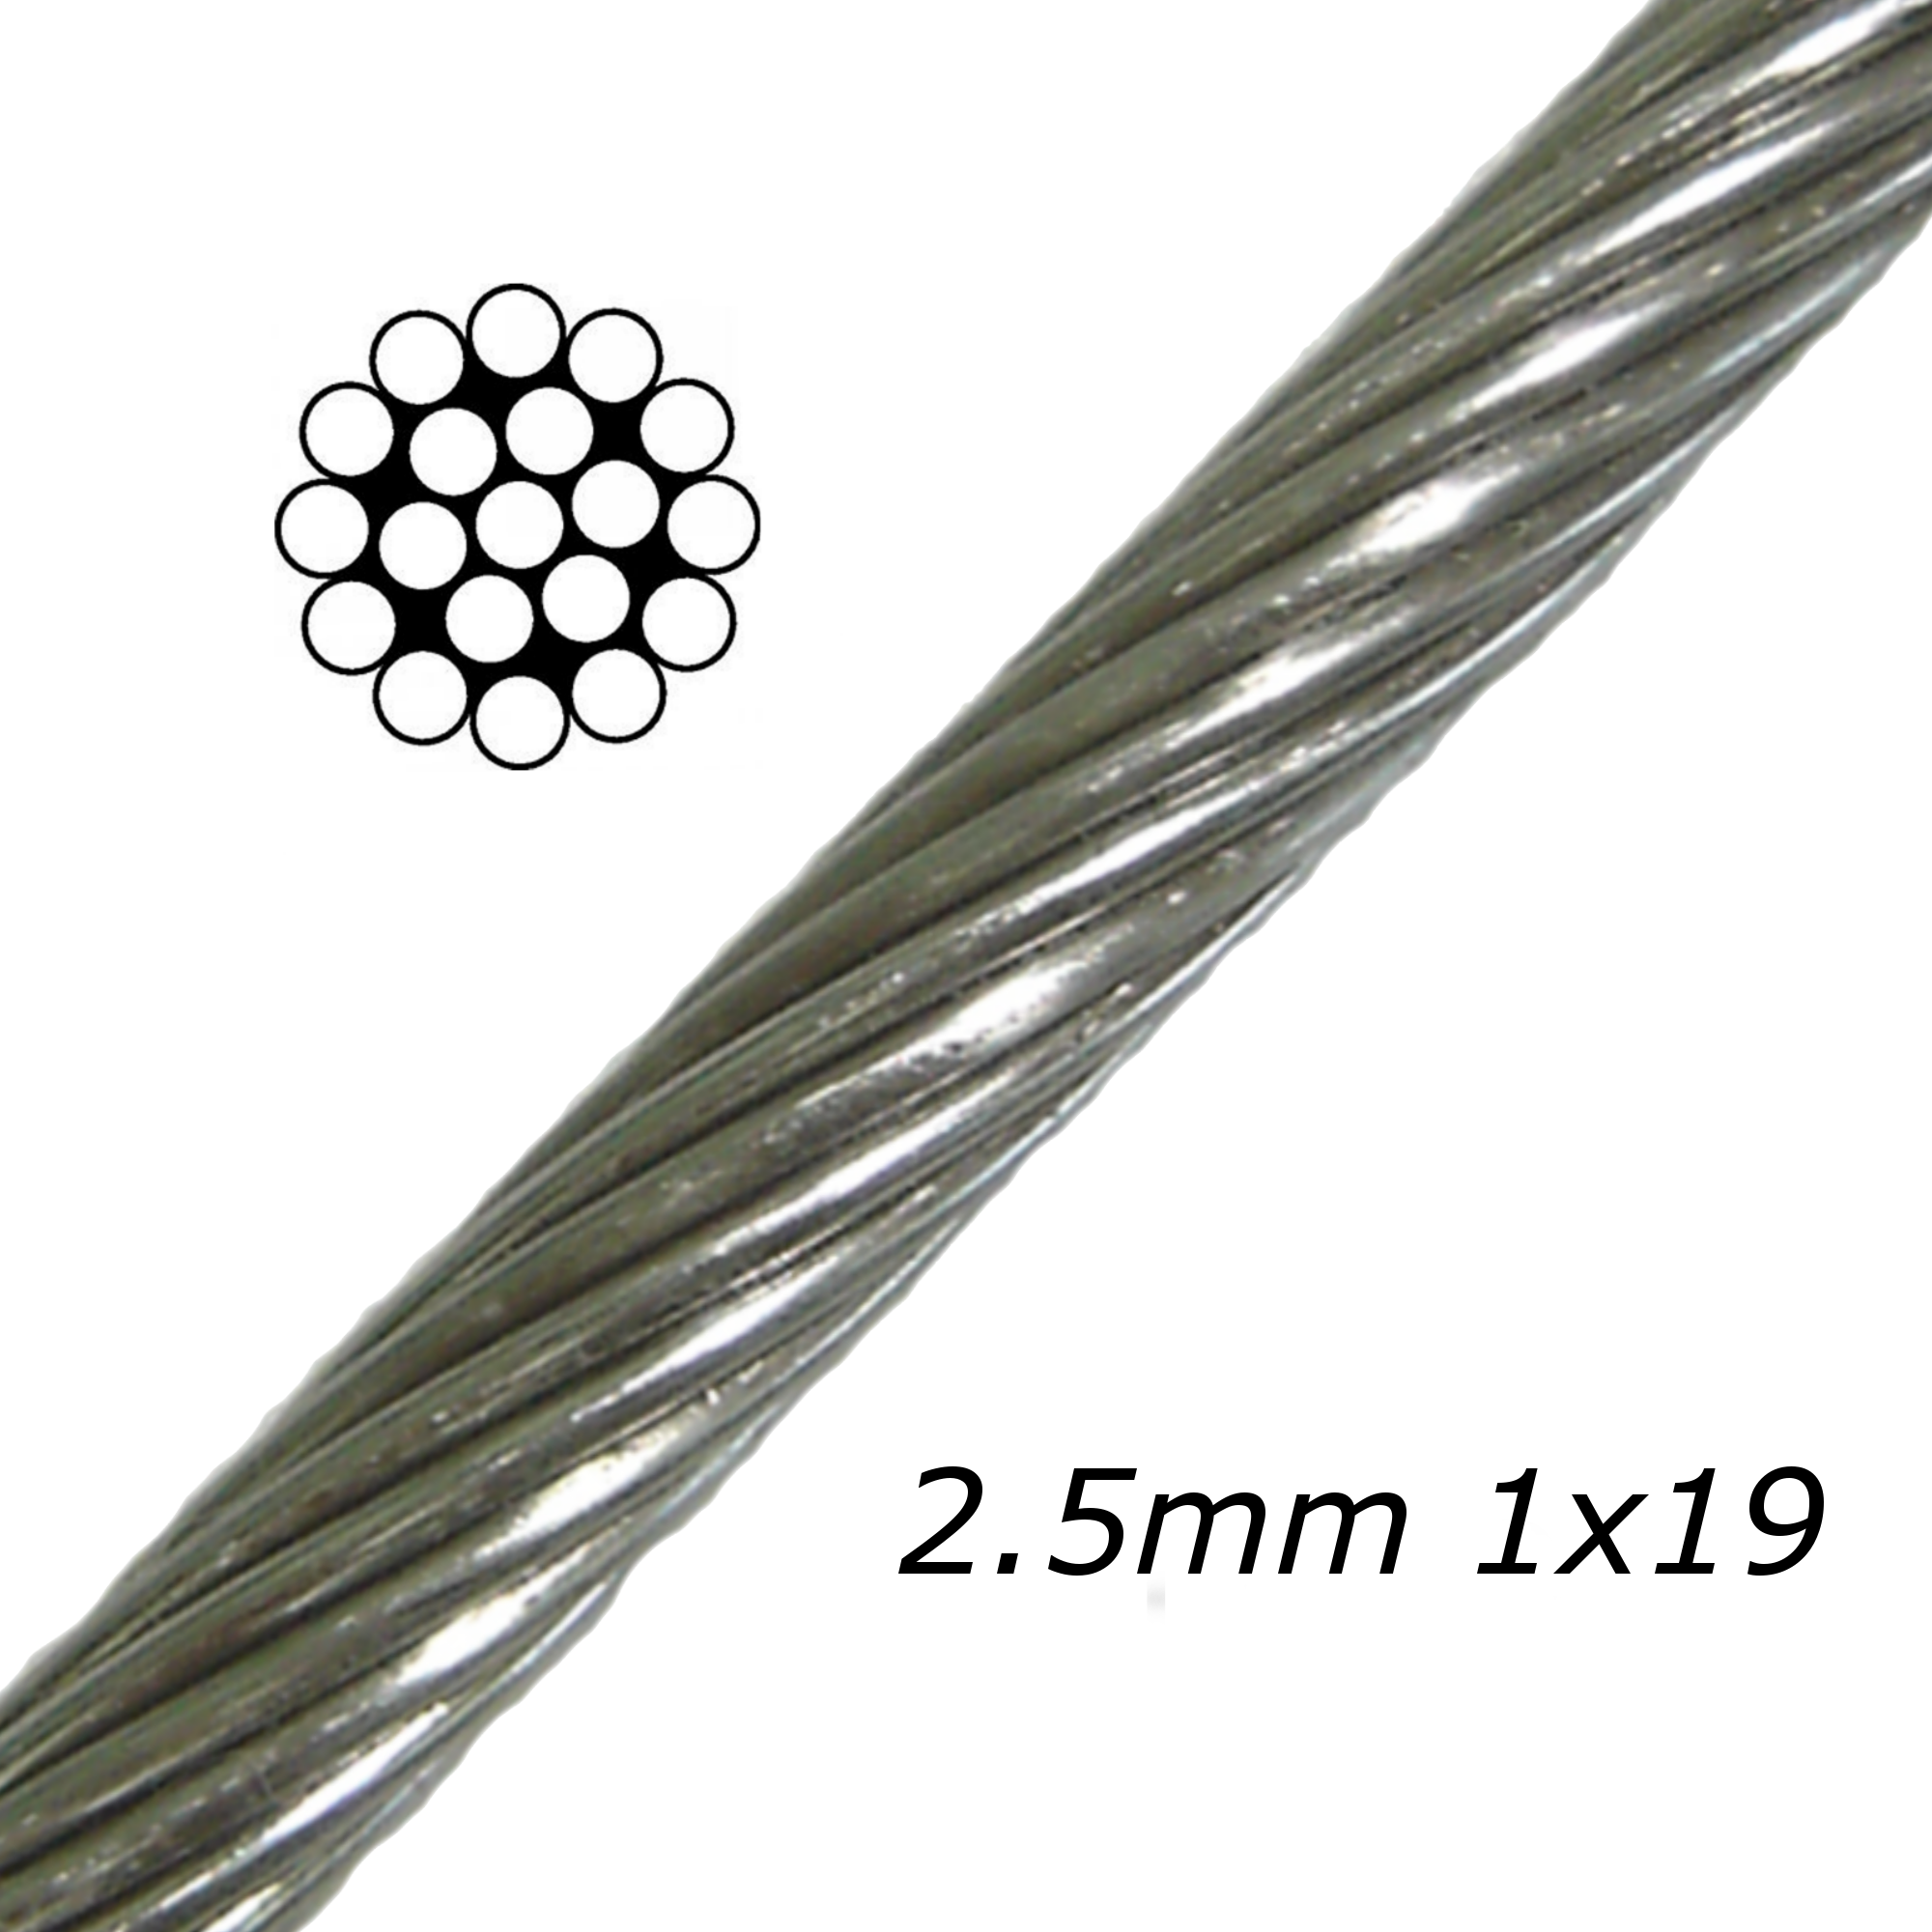 2.5mm Stainless Steel Cable 1x19